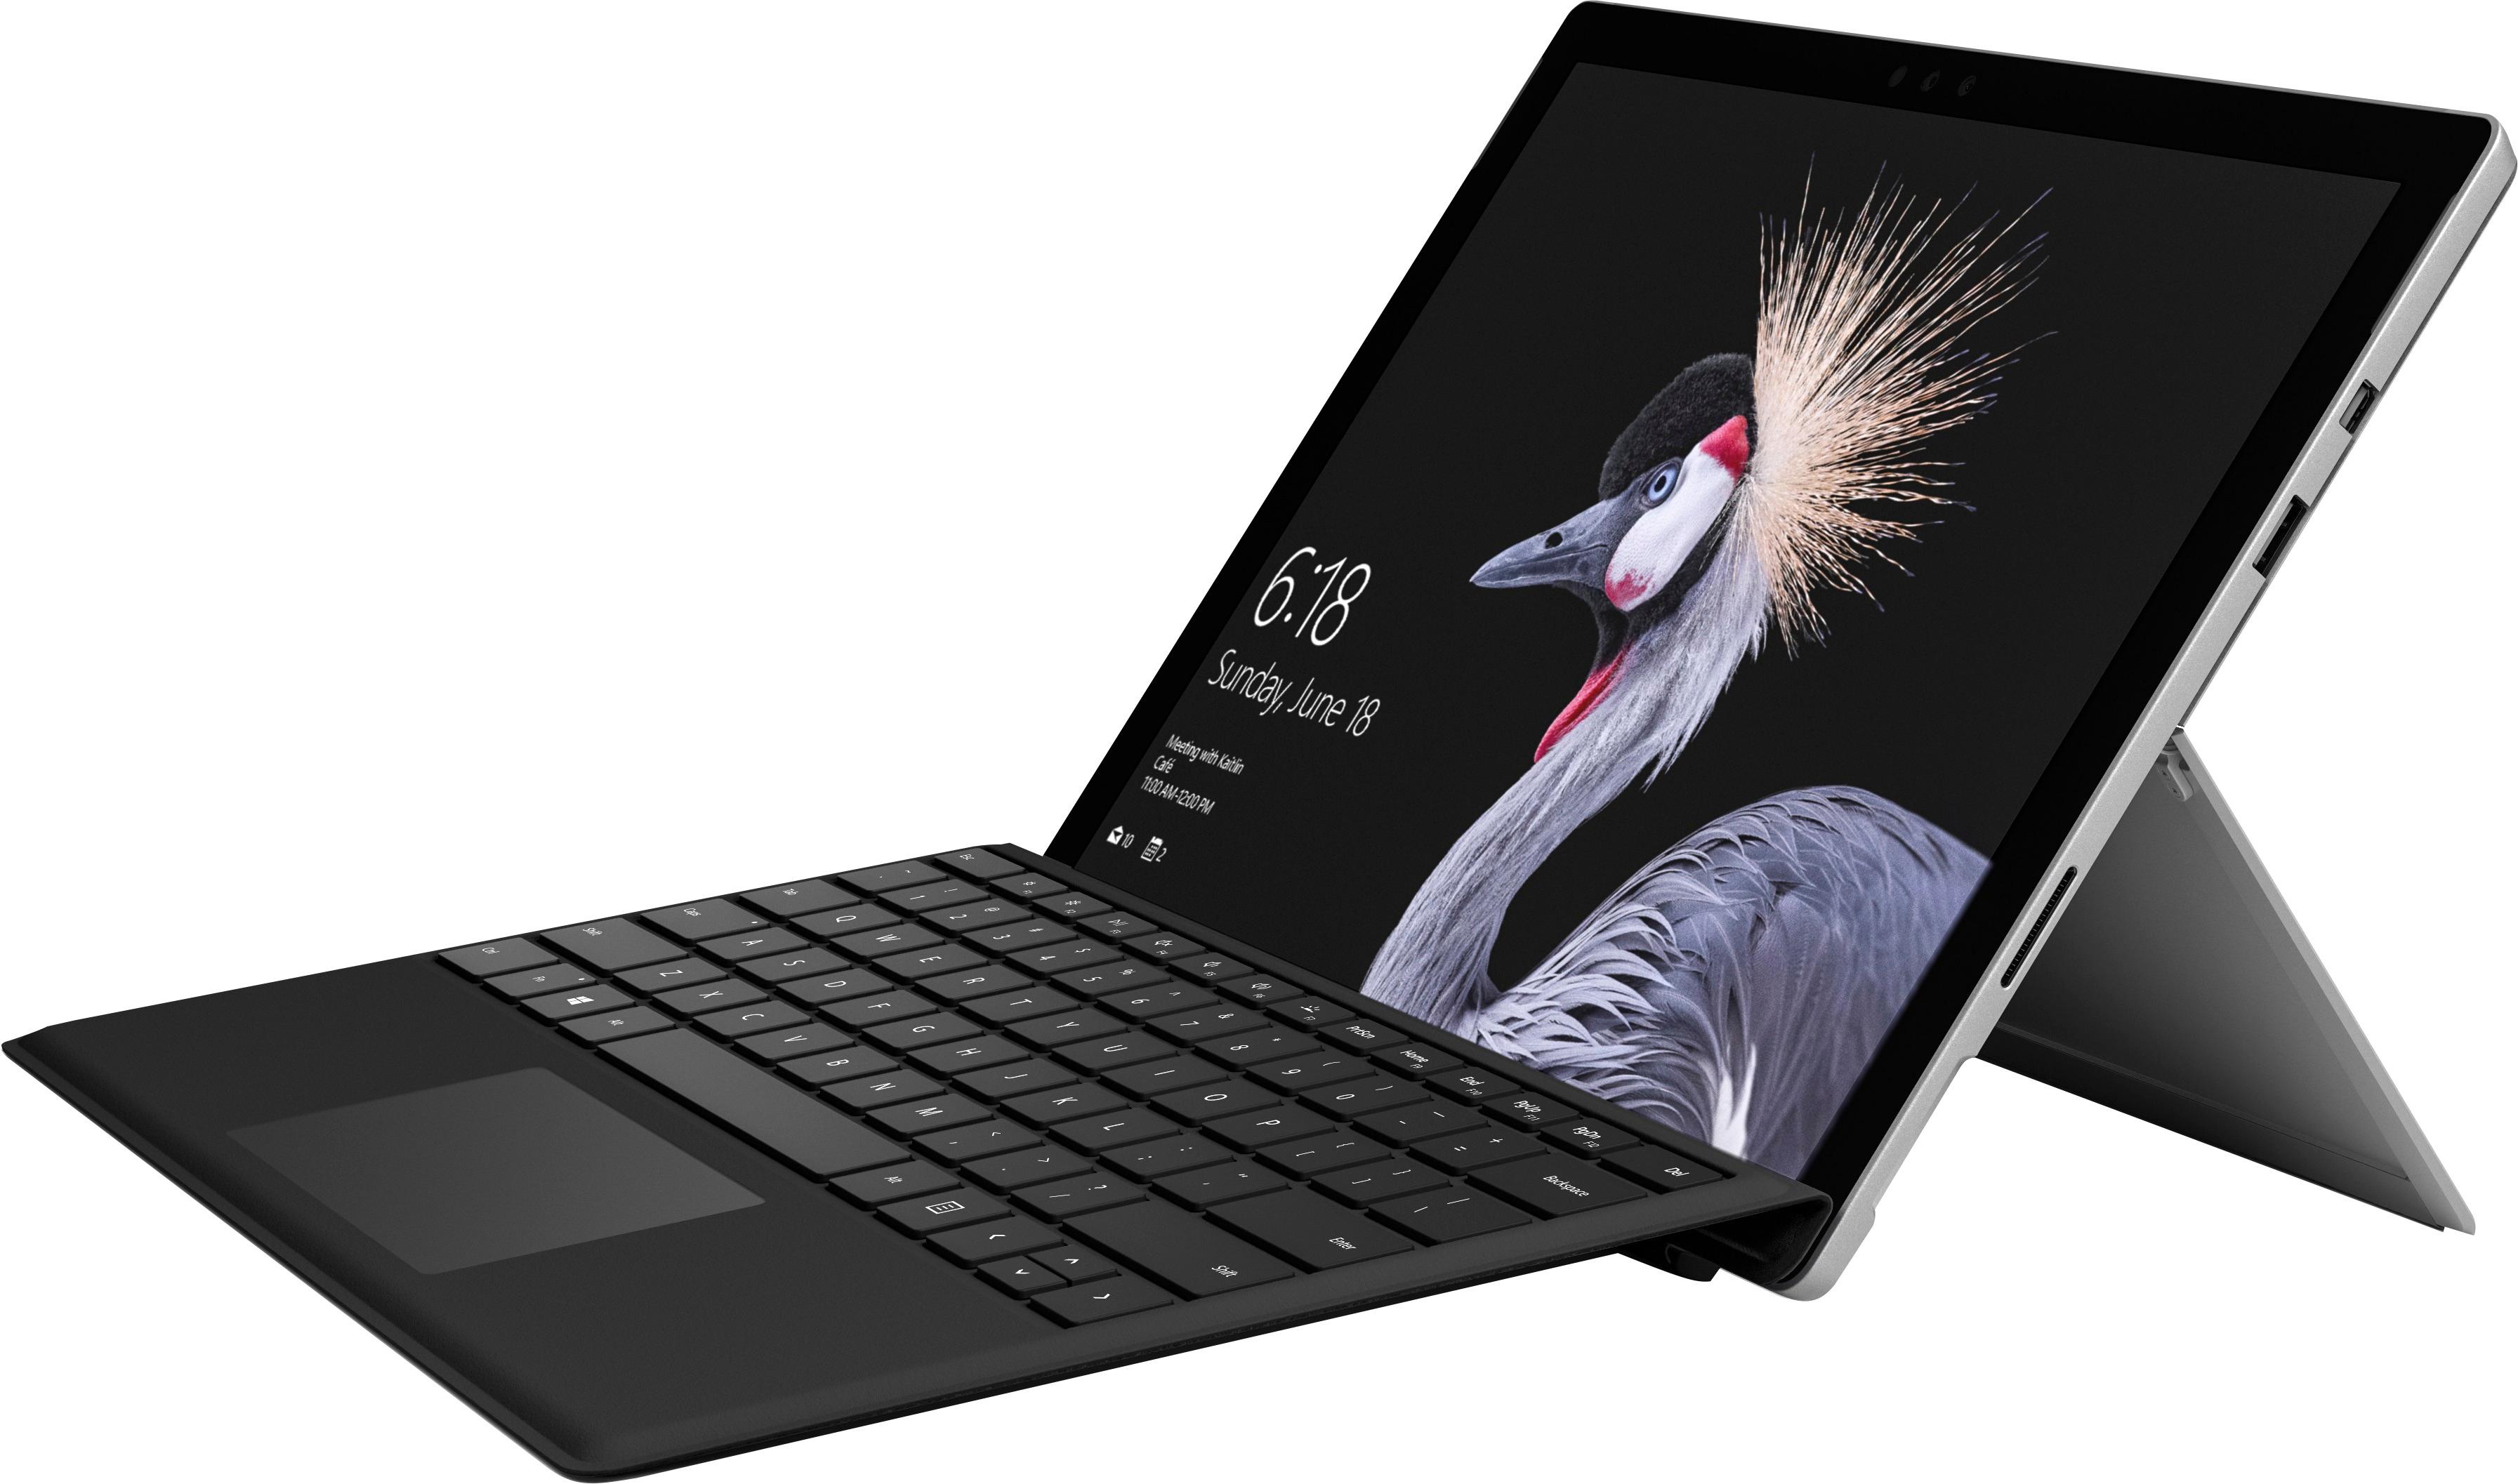 Microsoft Surface Pro 7 – 12.3 Touch-Screen - 10th Gen Intel Core i5 - 8GB  Memory - 256GB SSD – Matte Black with Black Type Cover